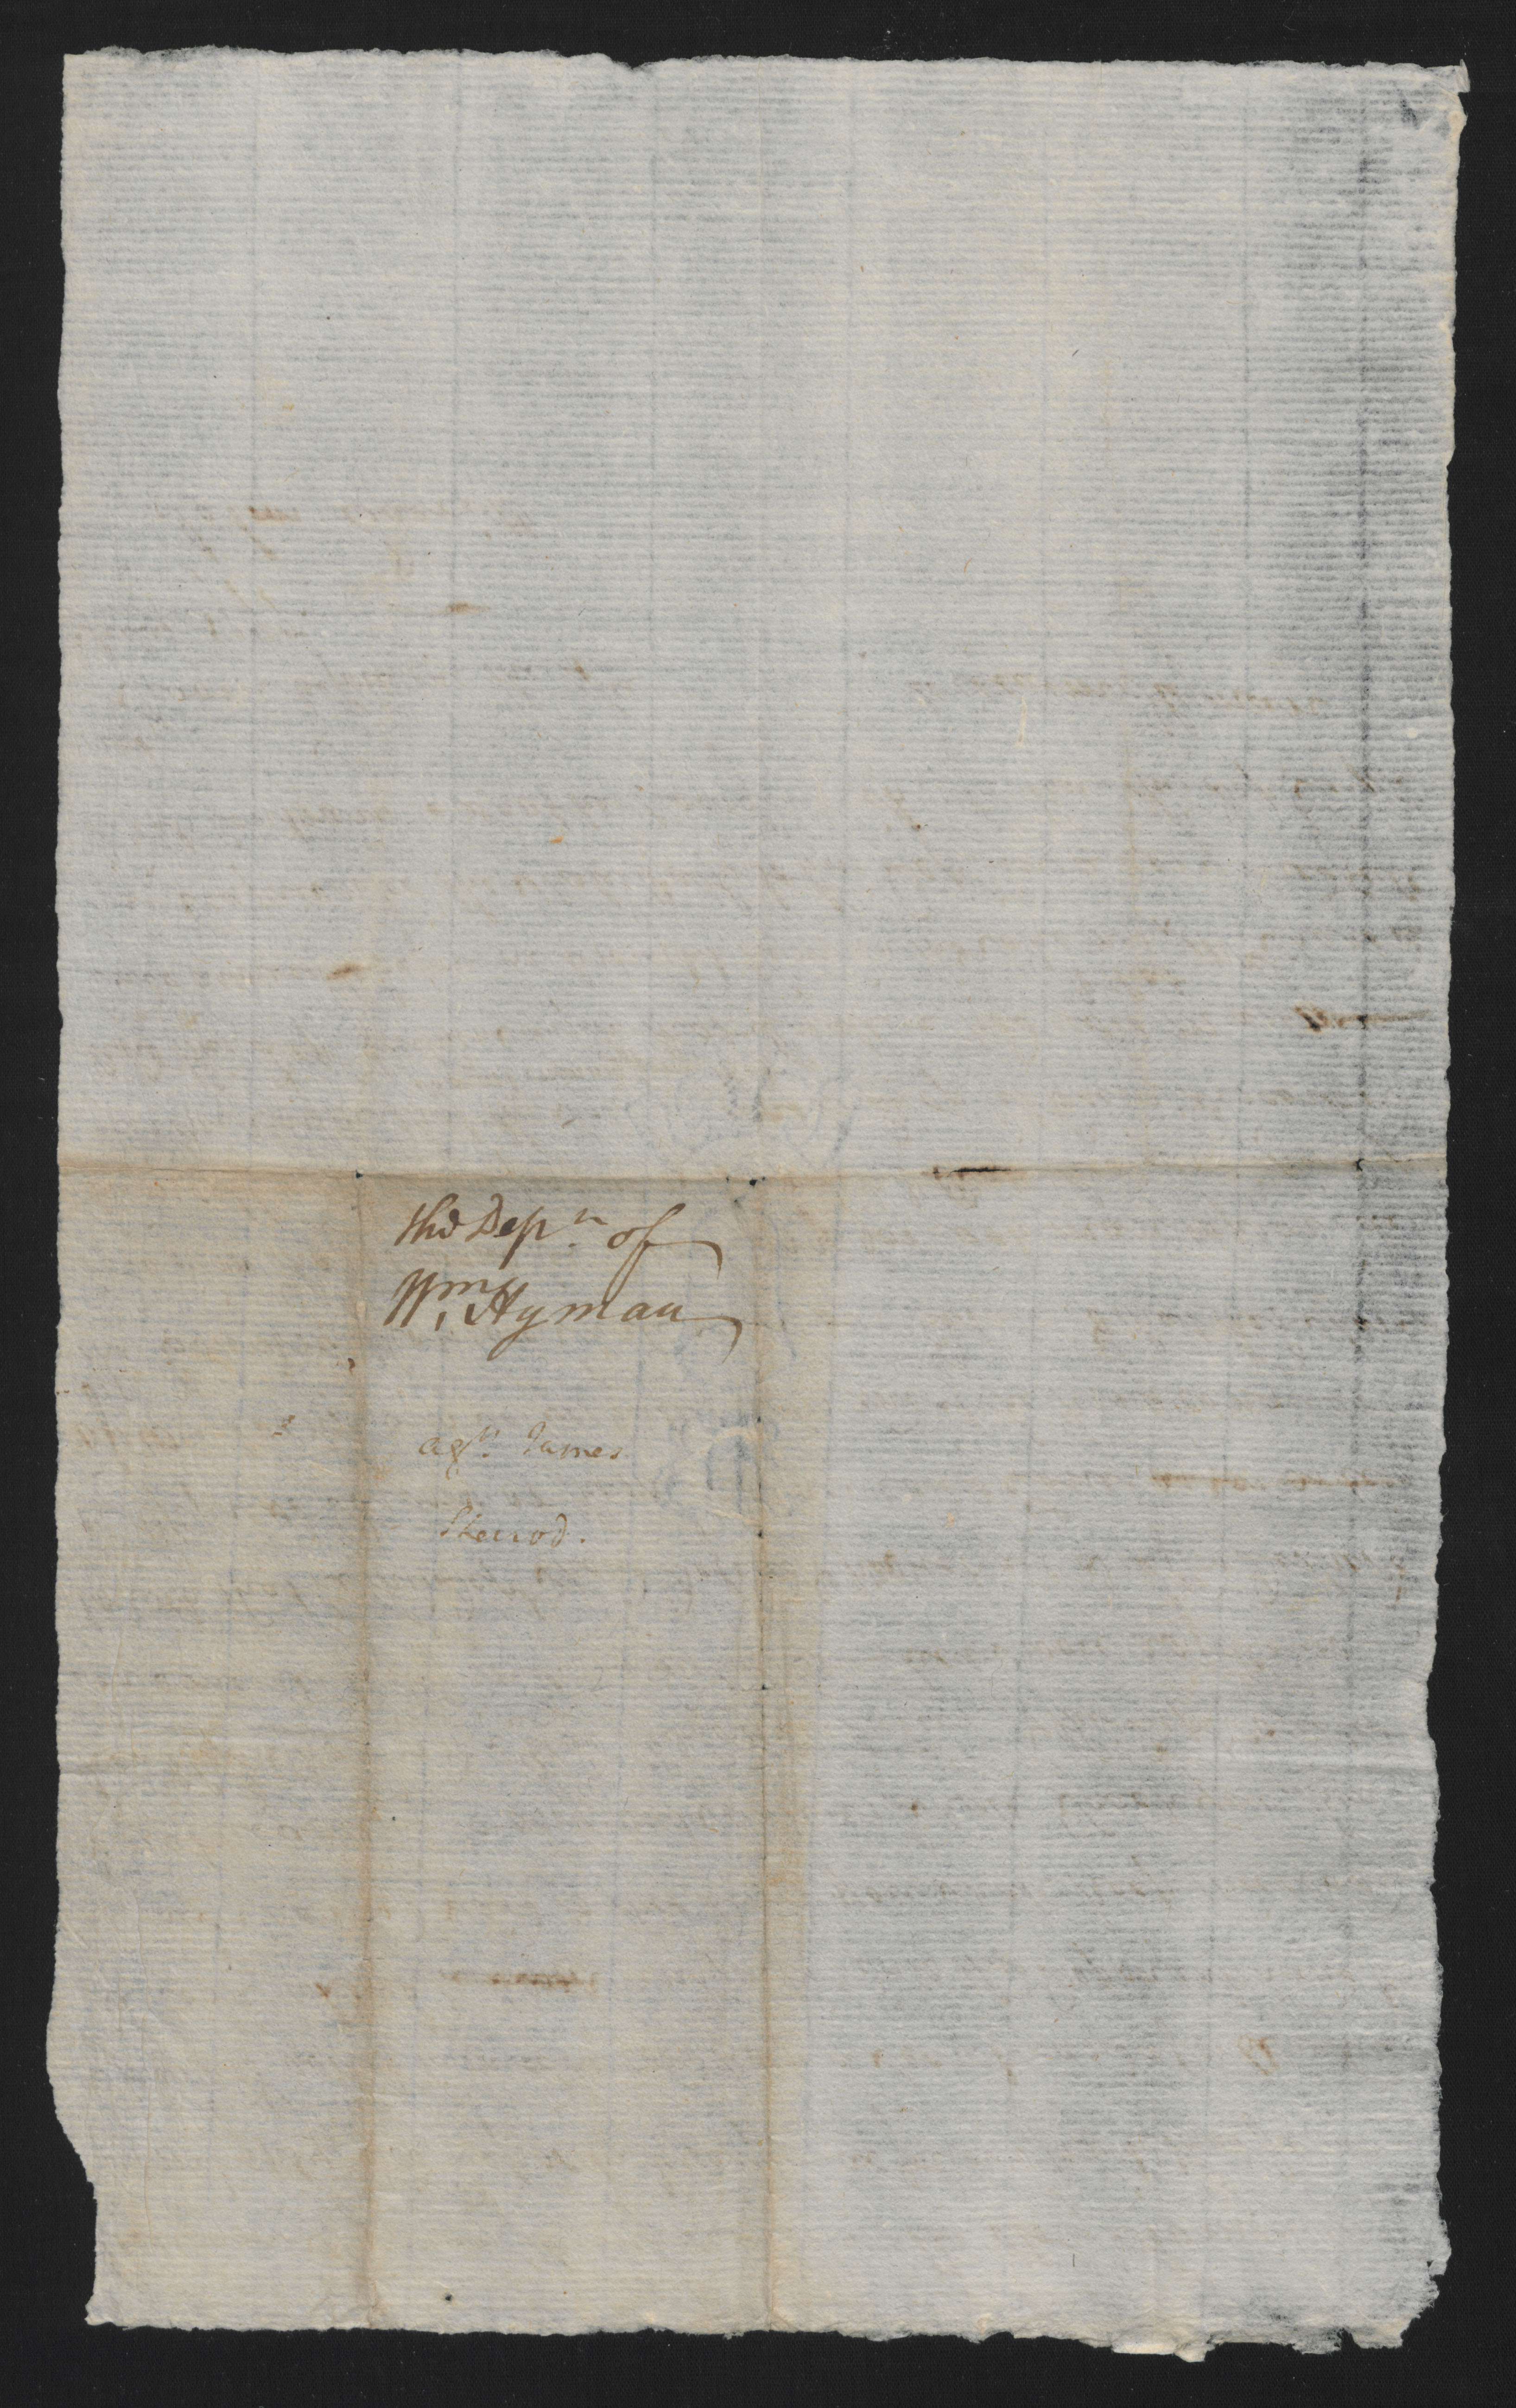 Deposition of William Hyman, 4 July 1777, page 2